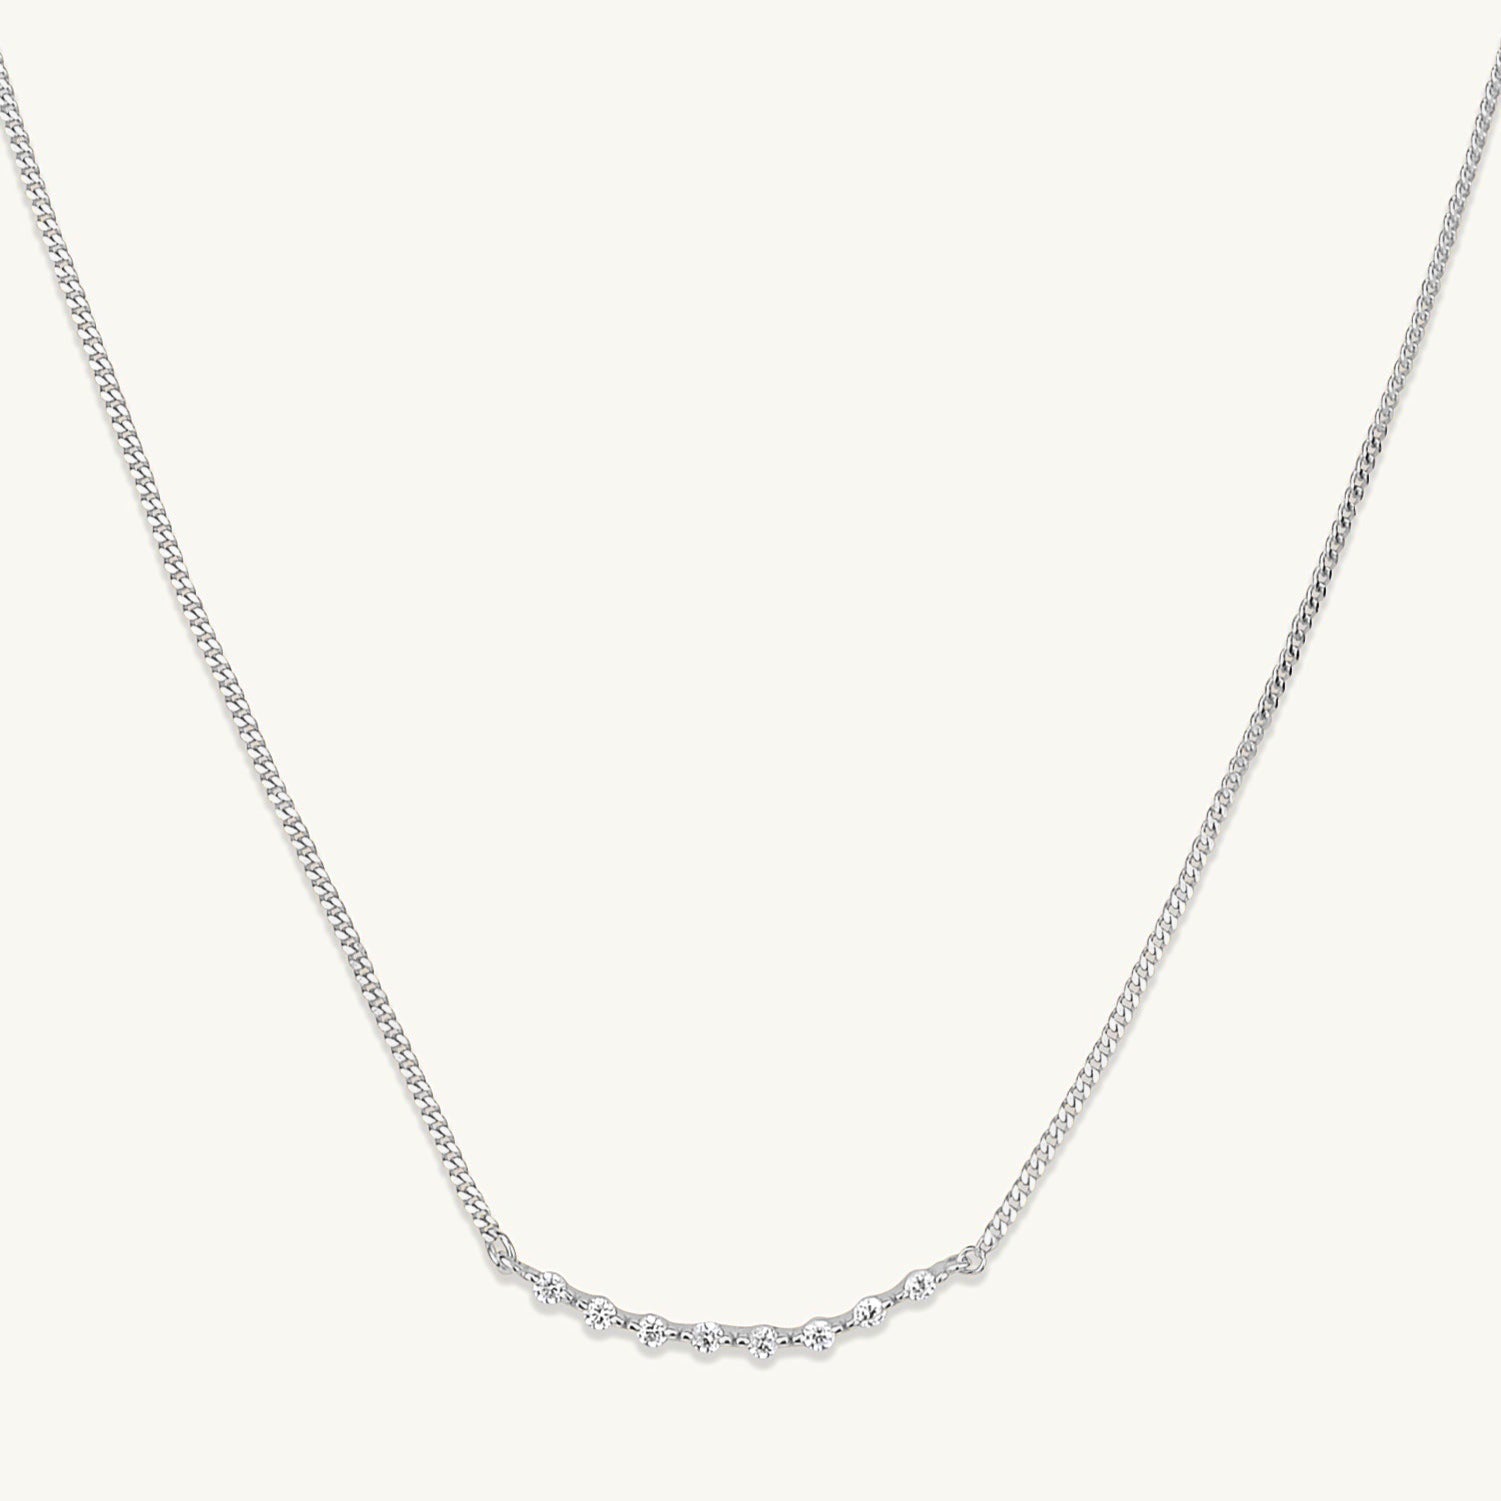 Curved Sapphire Bar Necklace